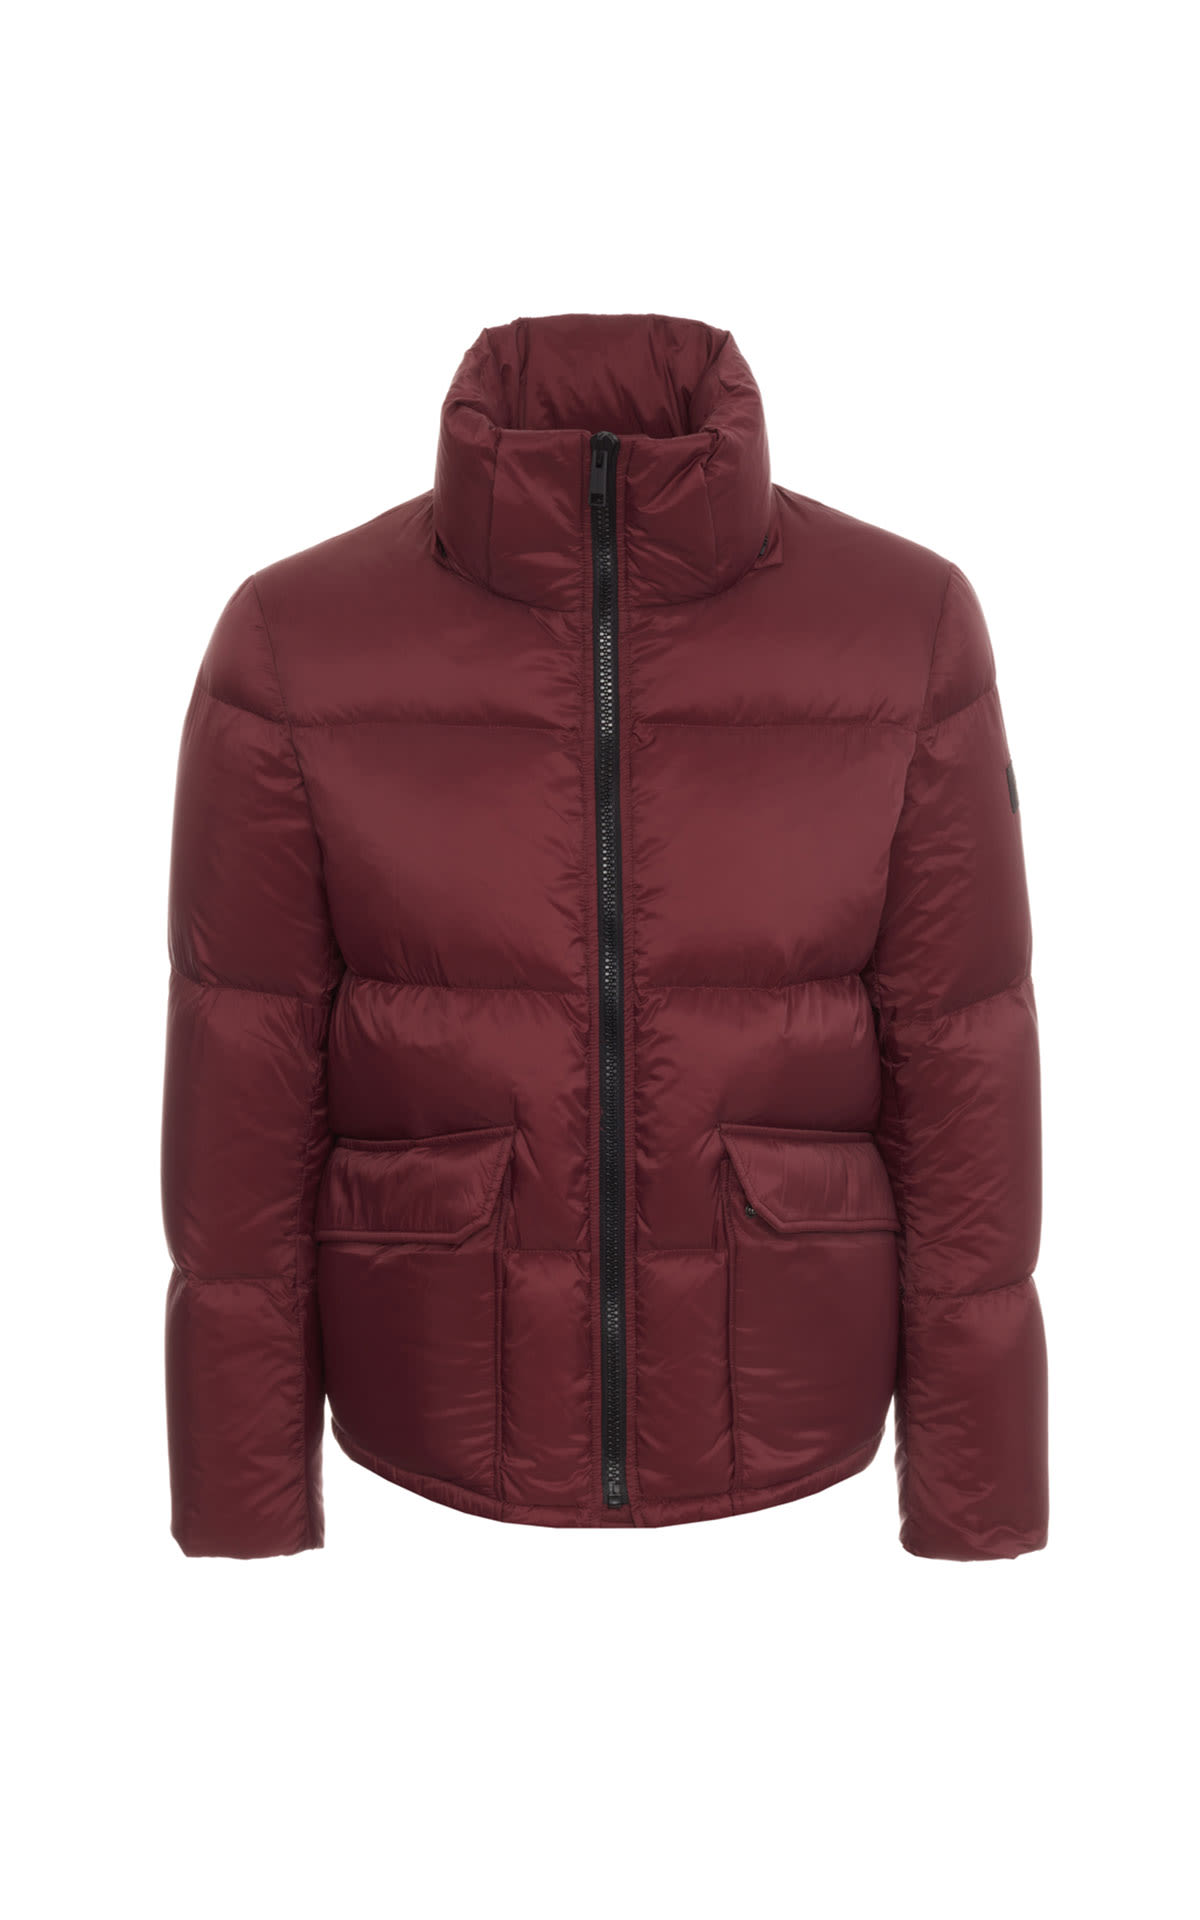 Yves Solomon Puffer jacket from Bicester Village